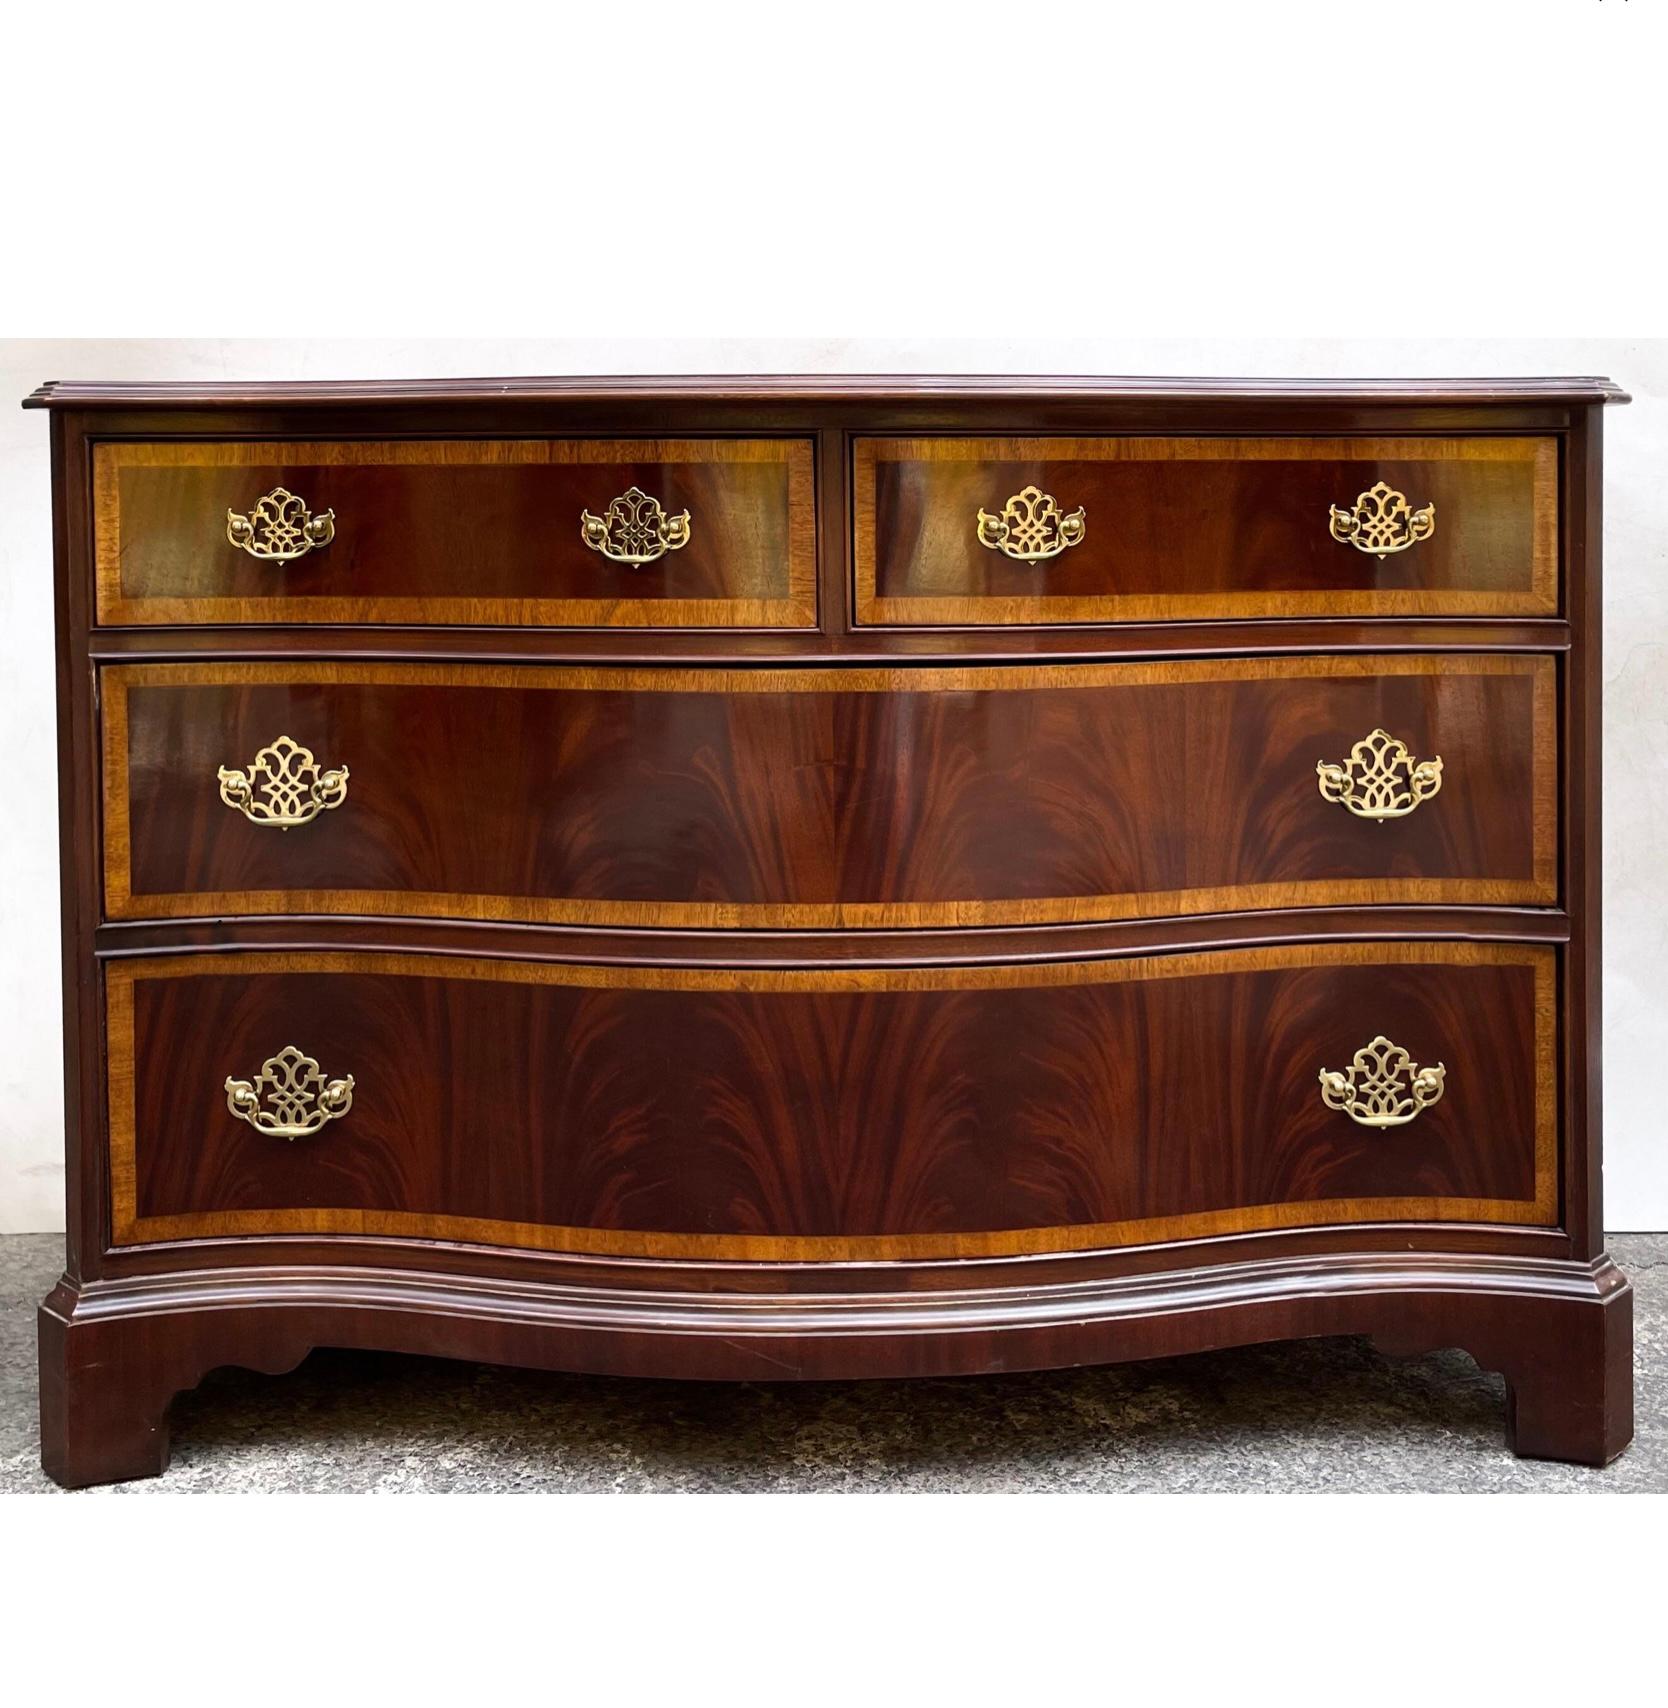 20th Century Hickory Furniture Chippendale Style Flame Mahogany Serpentine Chest - Pair For Sale